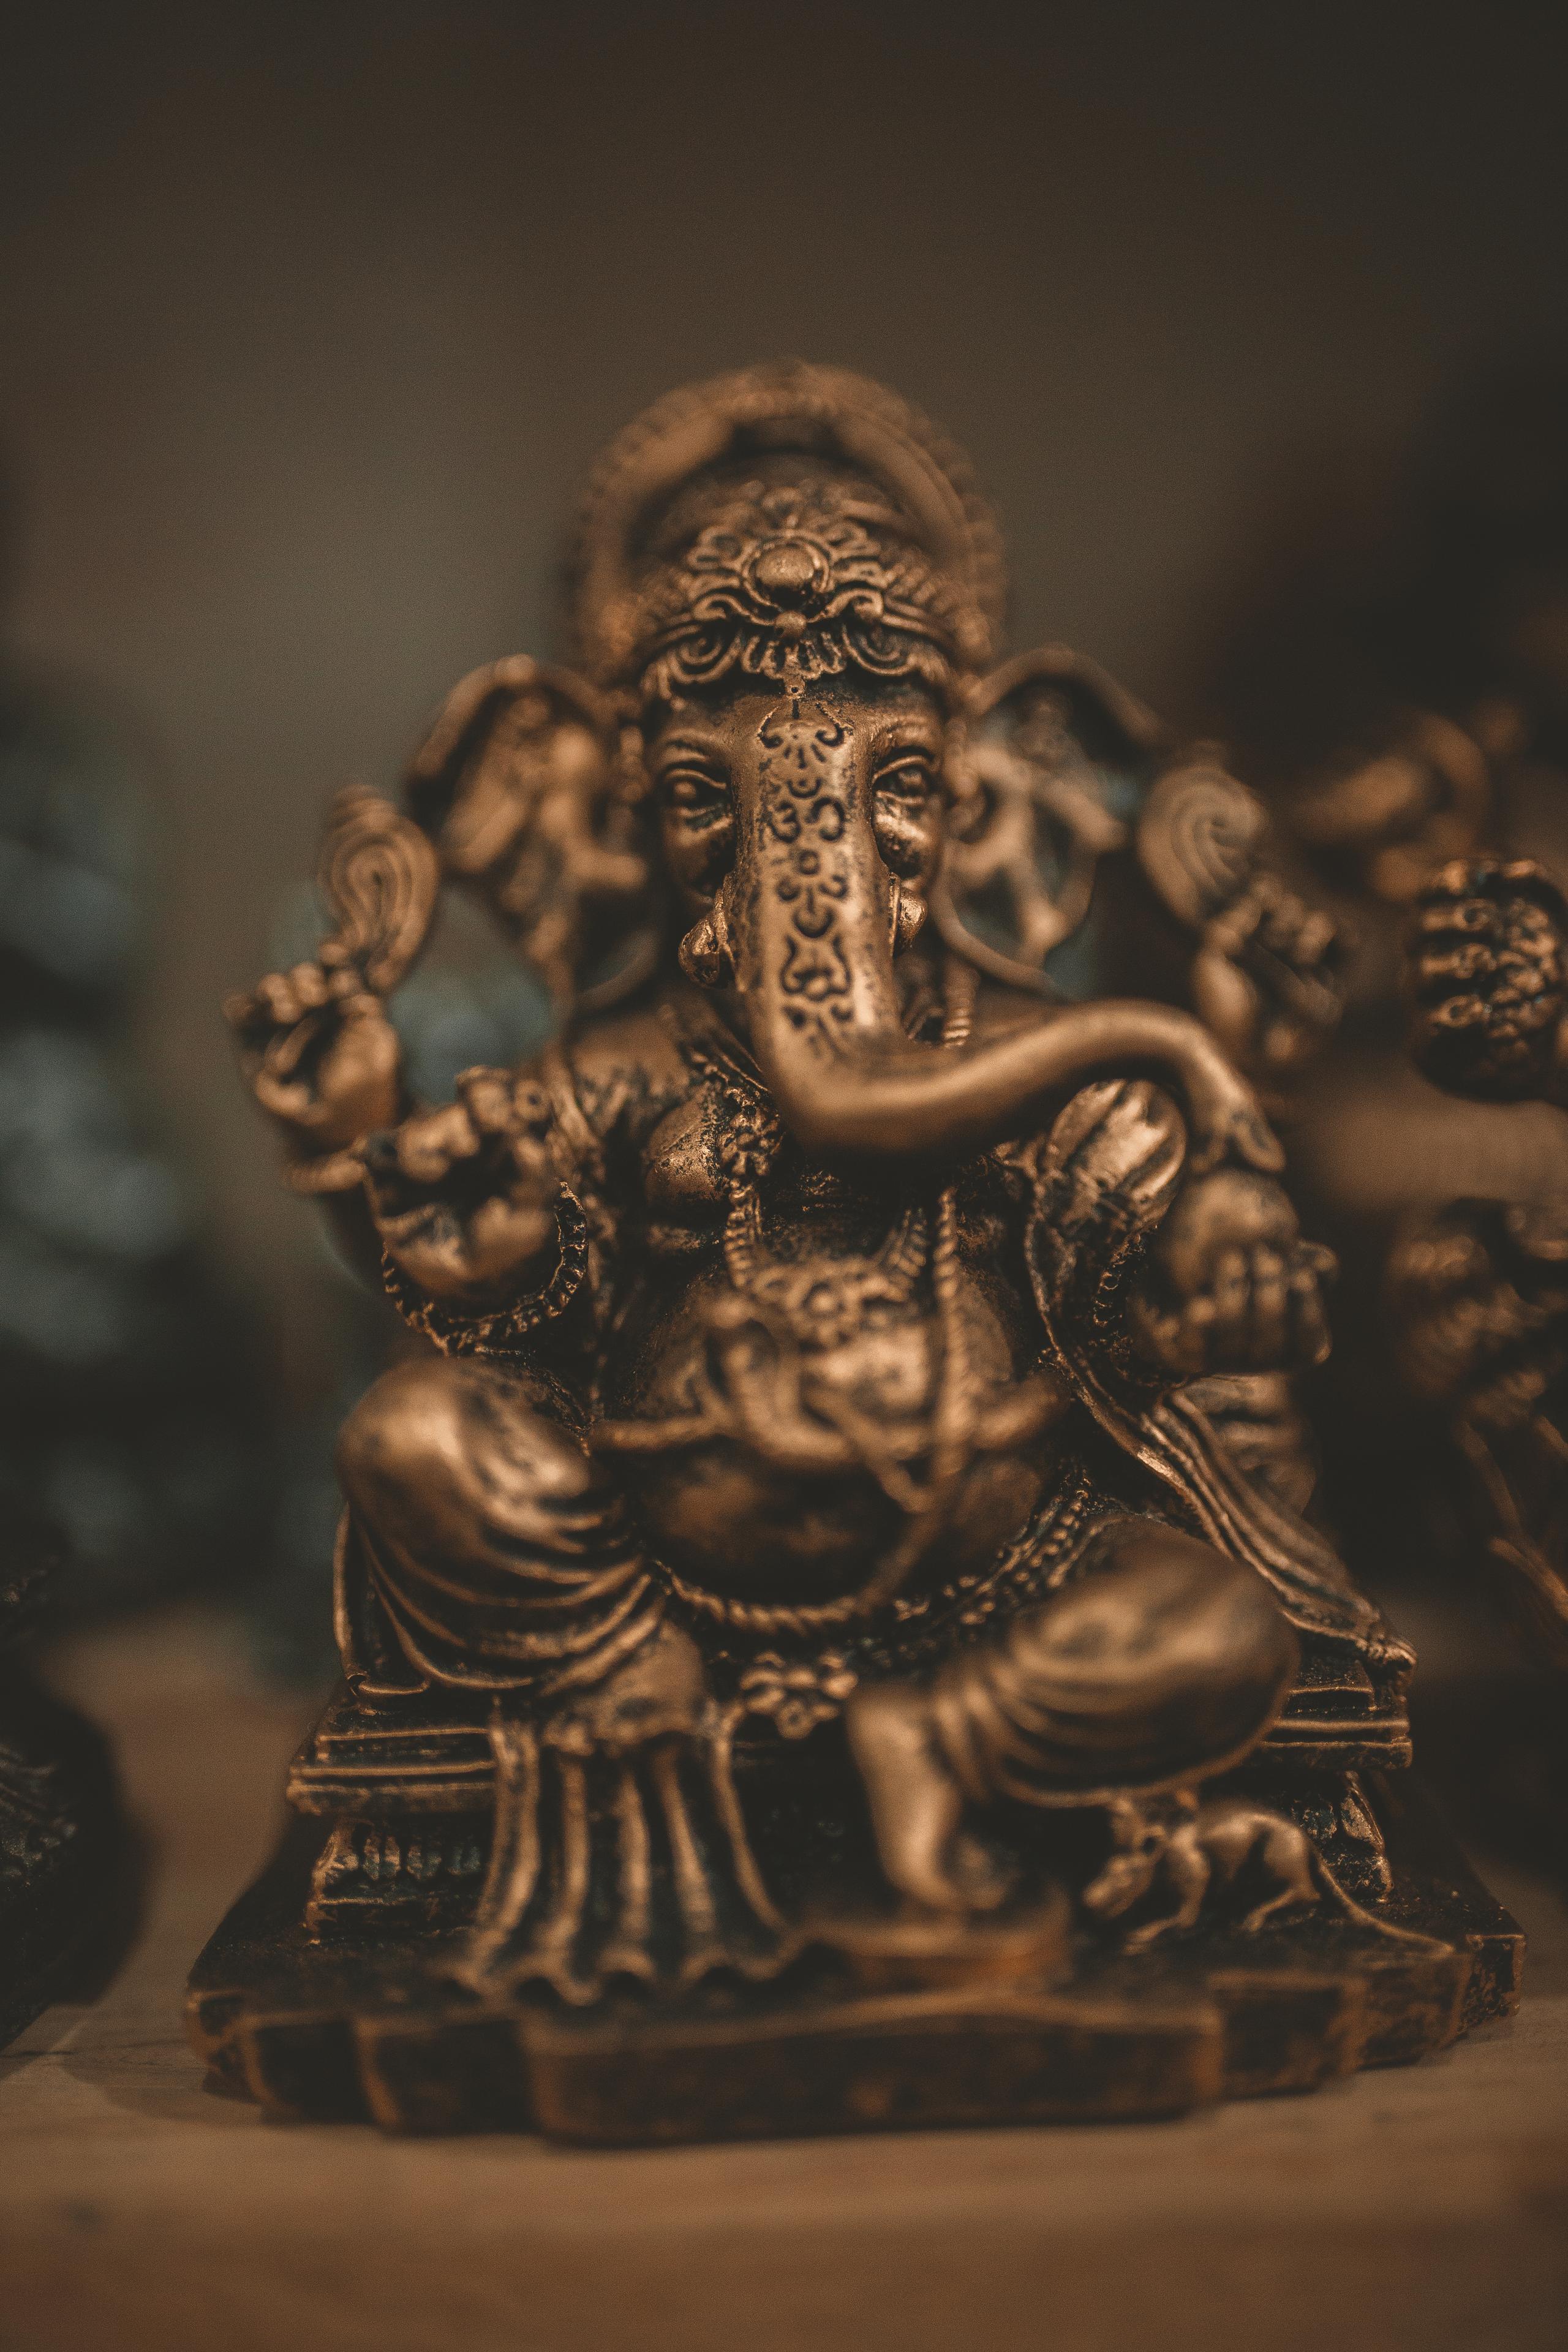 Envoke Lord Ganesha Energy To Remove Obstacles & Negativity In Your Life.